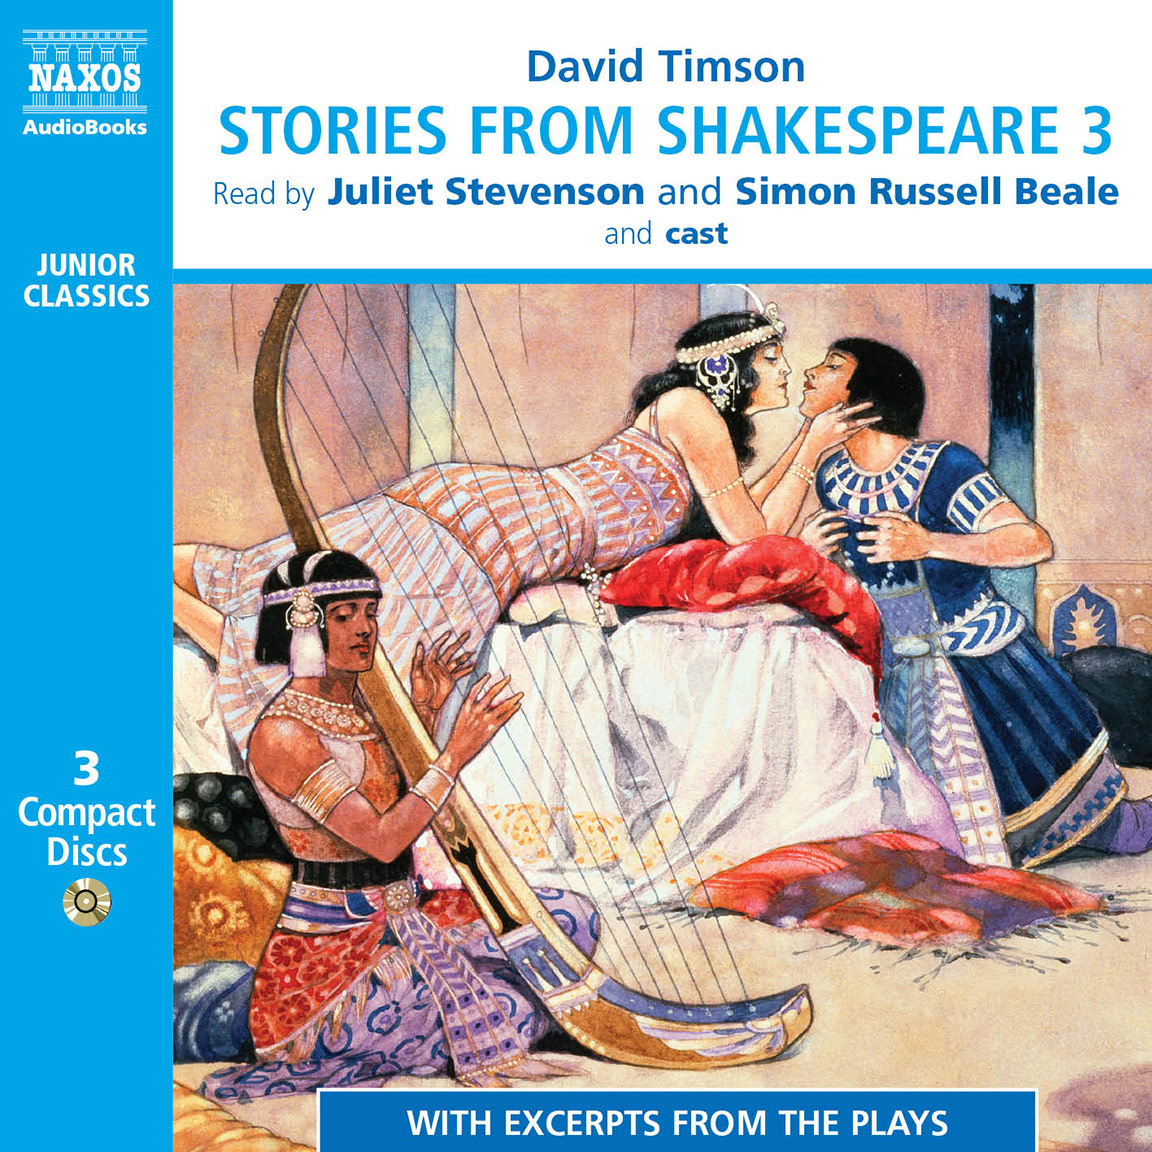 Stories from Shakespeare 3 (unabridged)